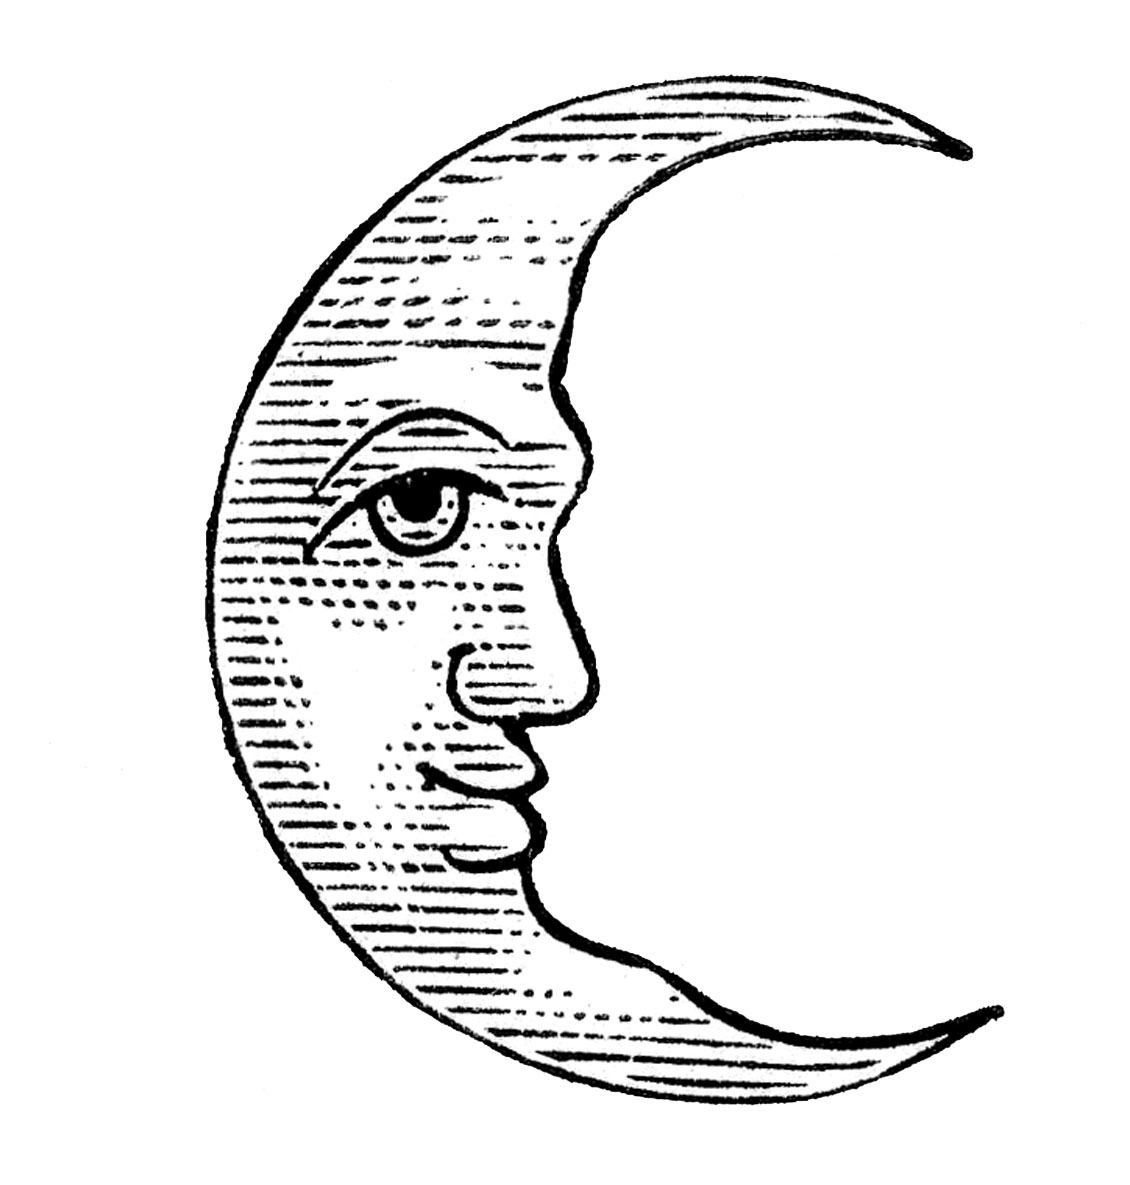 Clip Art Of The Moon - ClipArt Best